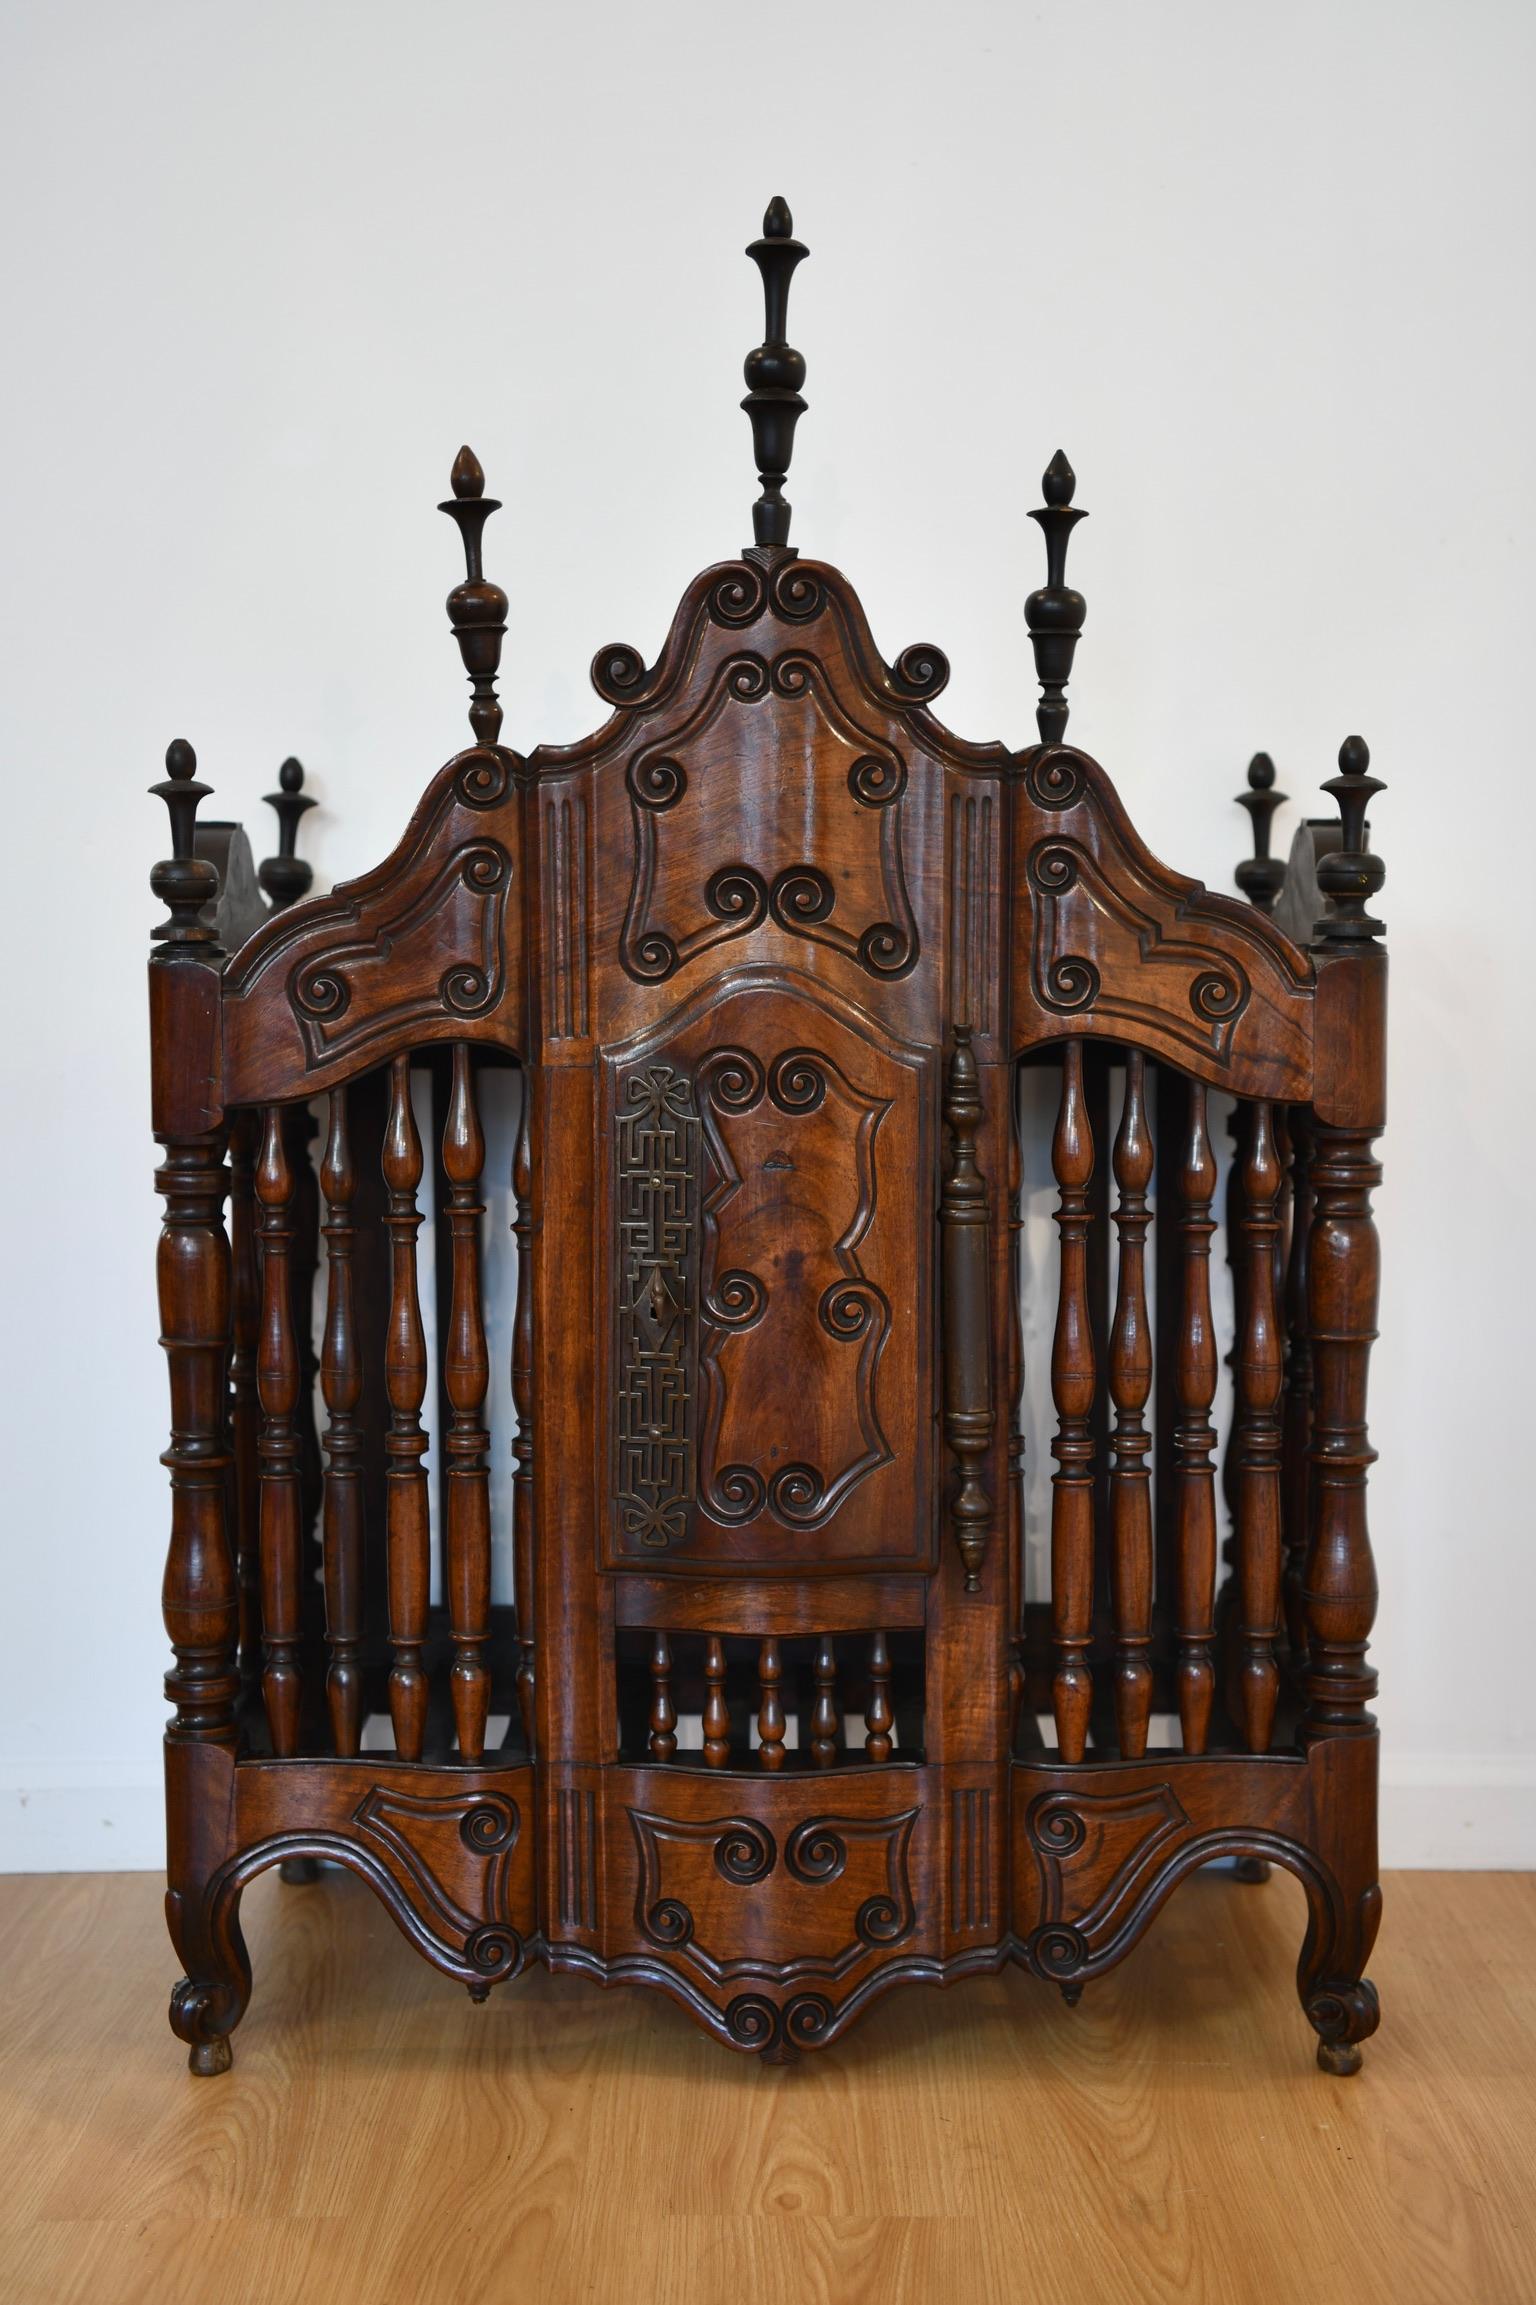 Antique mahogany panetierre with turned spindles, carved details, and original key and lock. Dimensions: 47